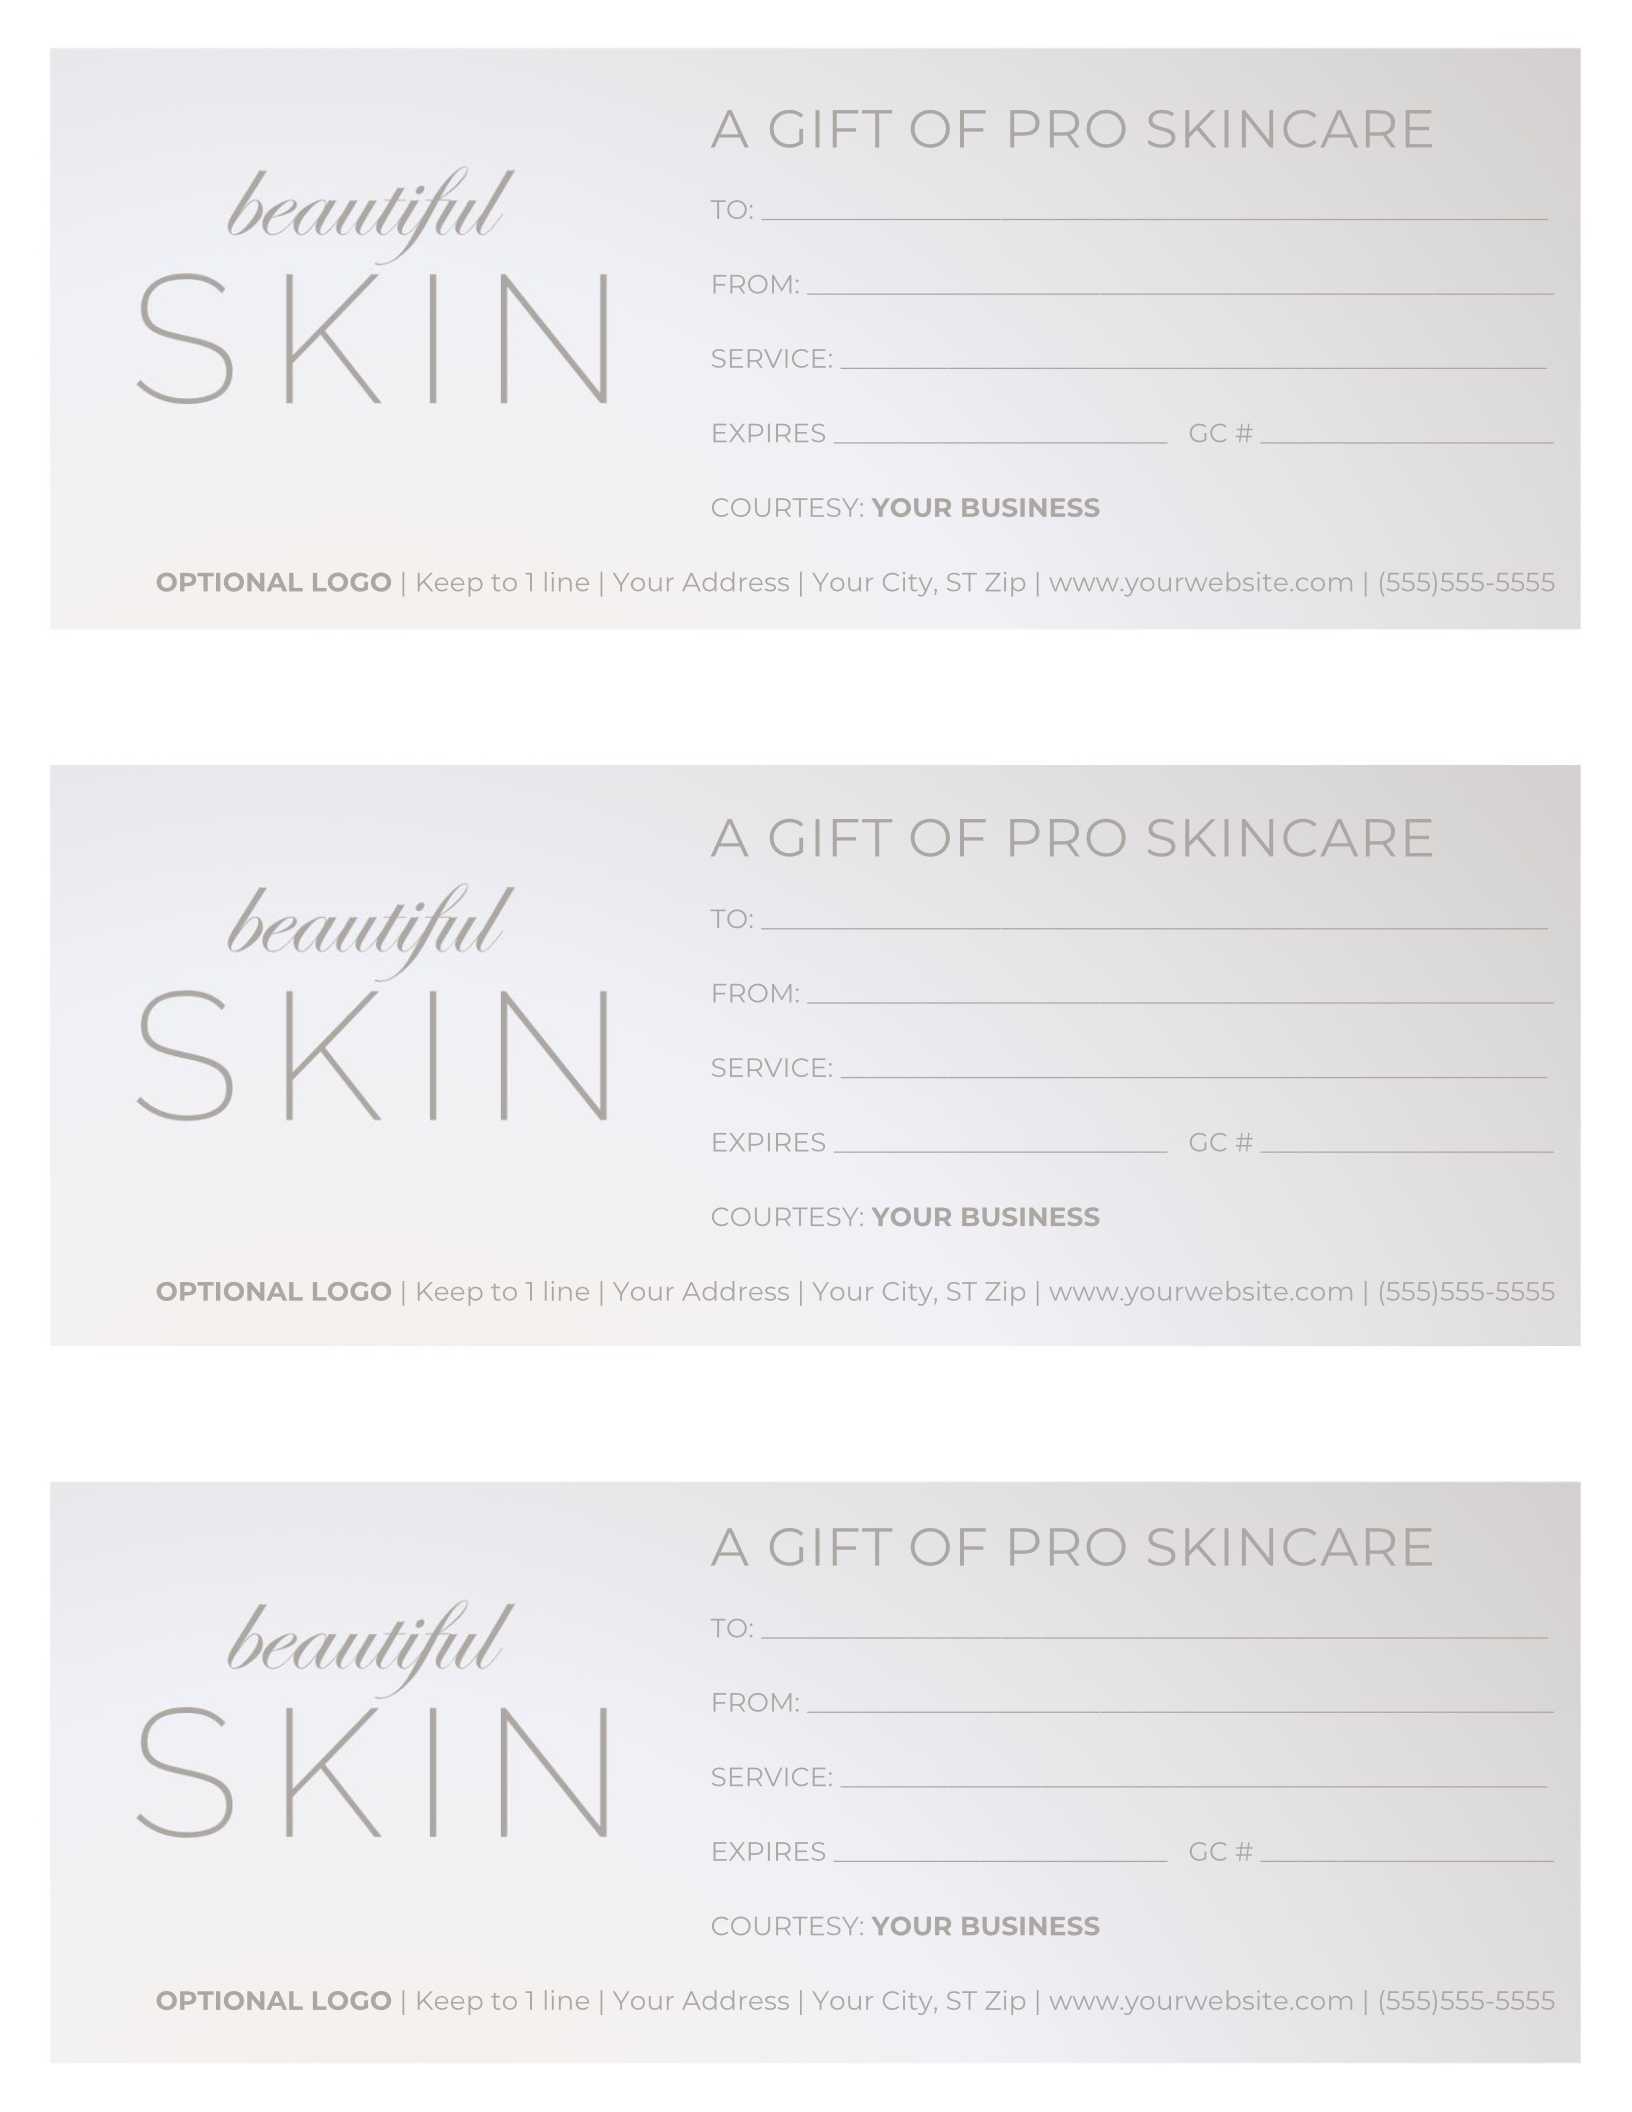 Free Gift Certificate Templates For Massage And Spa Throughout Spa Day Gift Certificate Template